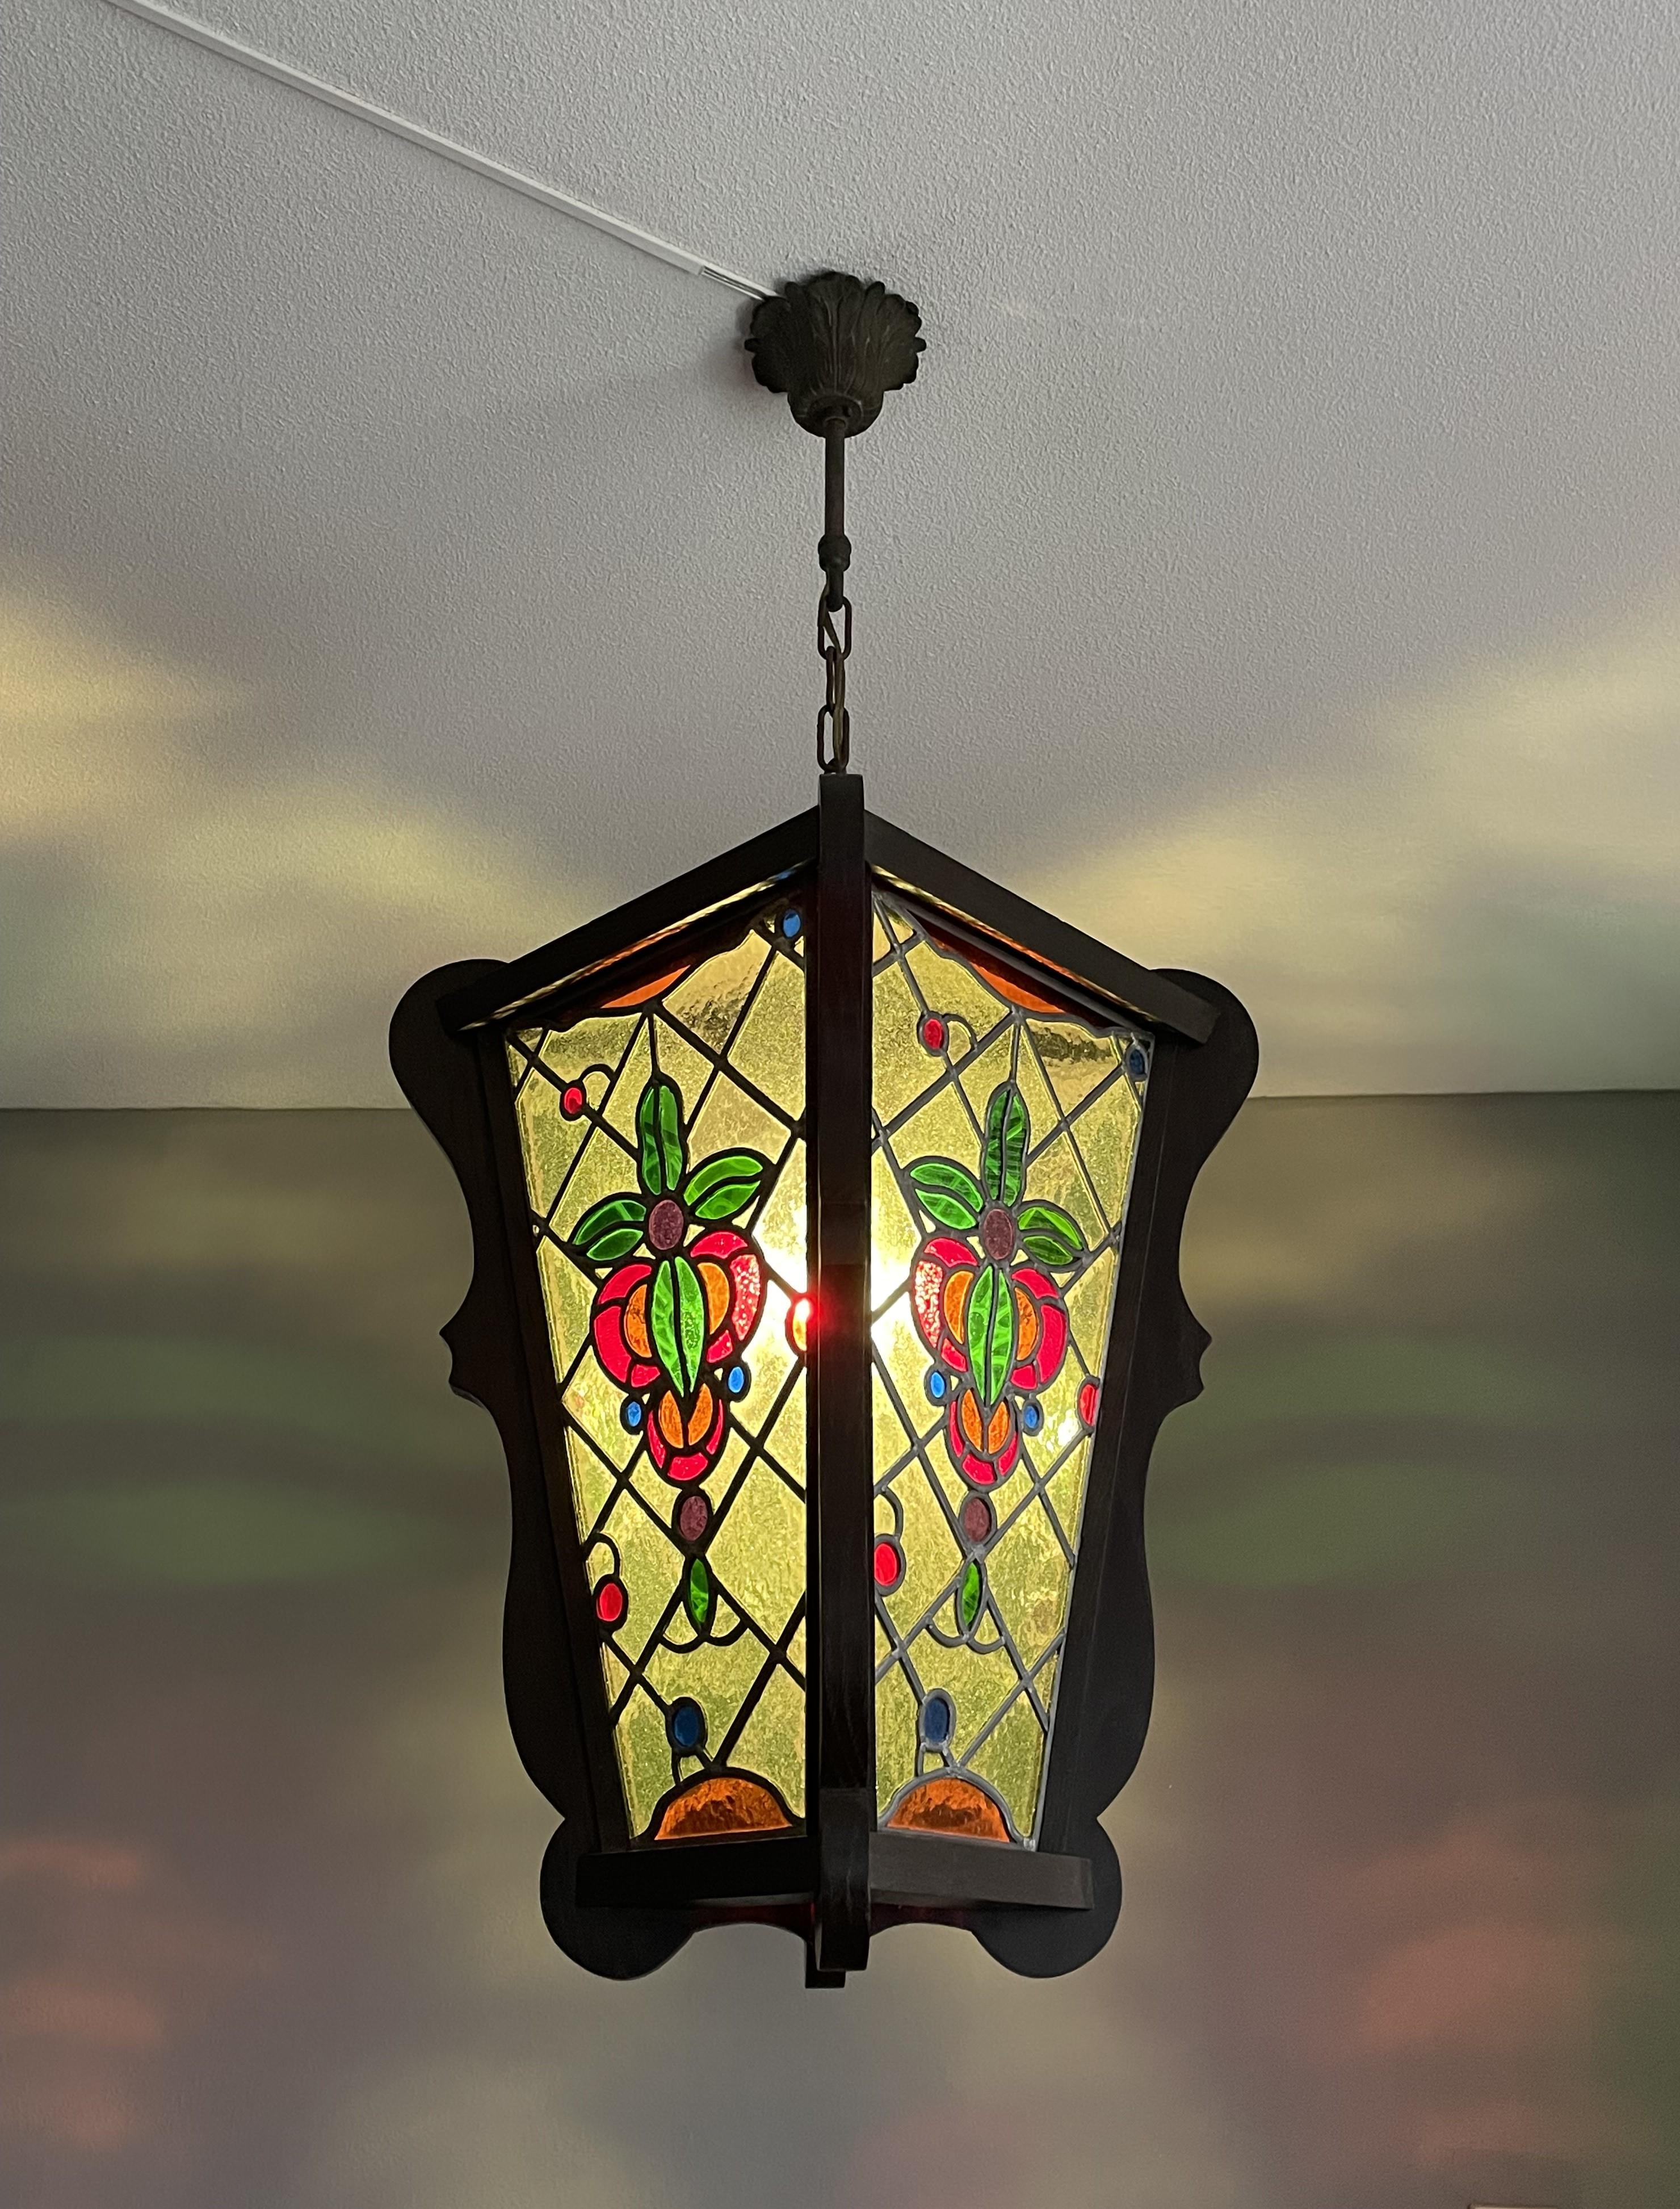 One of a kind and large antique hallway lantern.

This large and stately, Victorian Style chandelier is another one of our recent great finds. Its large size and unique design makes it suitable for not only a large entrance, but also for a stately